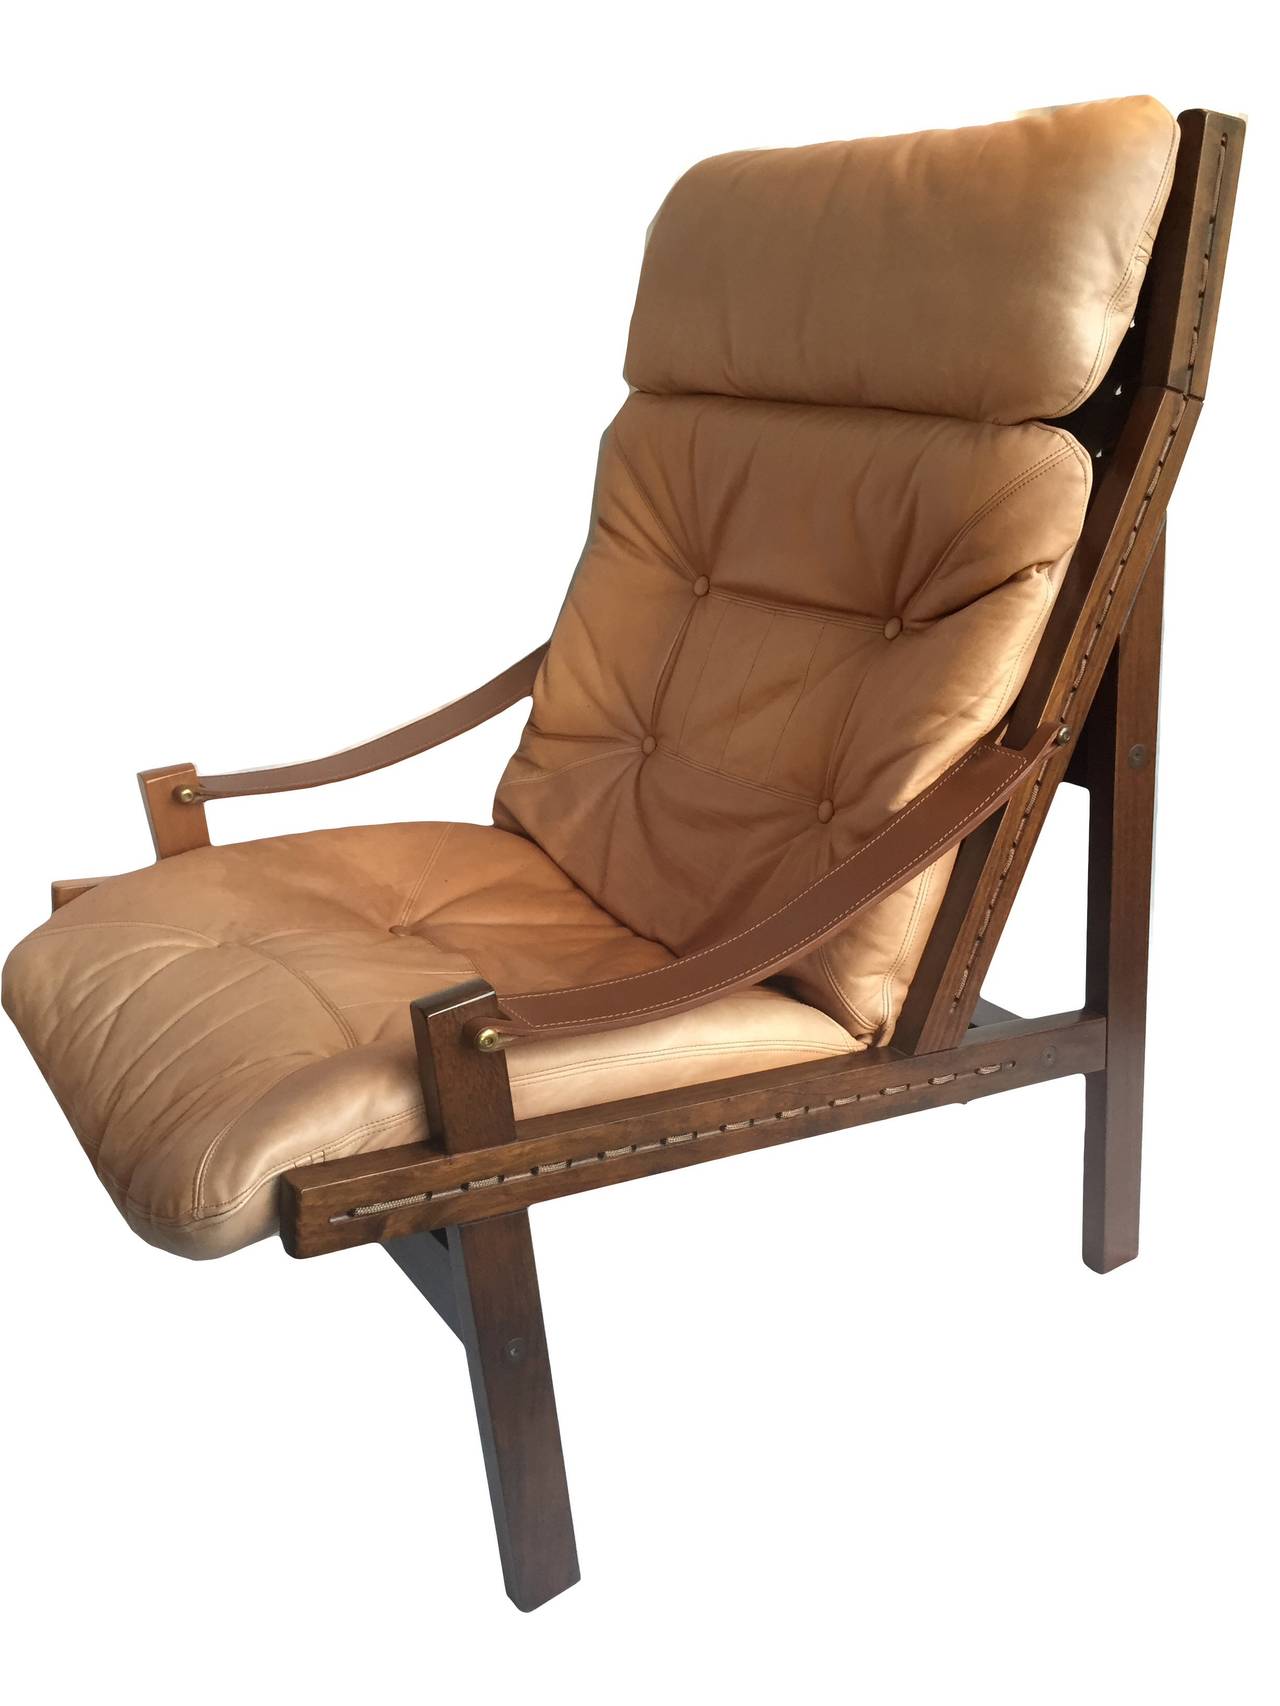 High back Hunter chair with ottoman by Torbjorn Afdal, Vatne, Norway, 1960.
Lovely walnut frame with very light tan leather upholstery. 
Another matching chair is available without an ottoman.
Easily dismantled/assembled for shipping